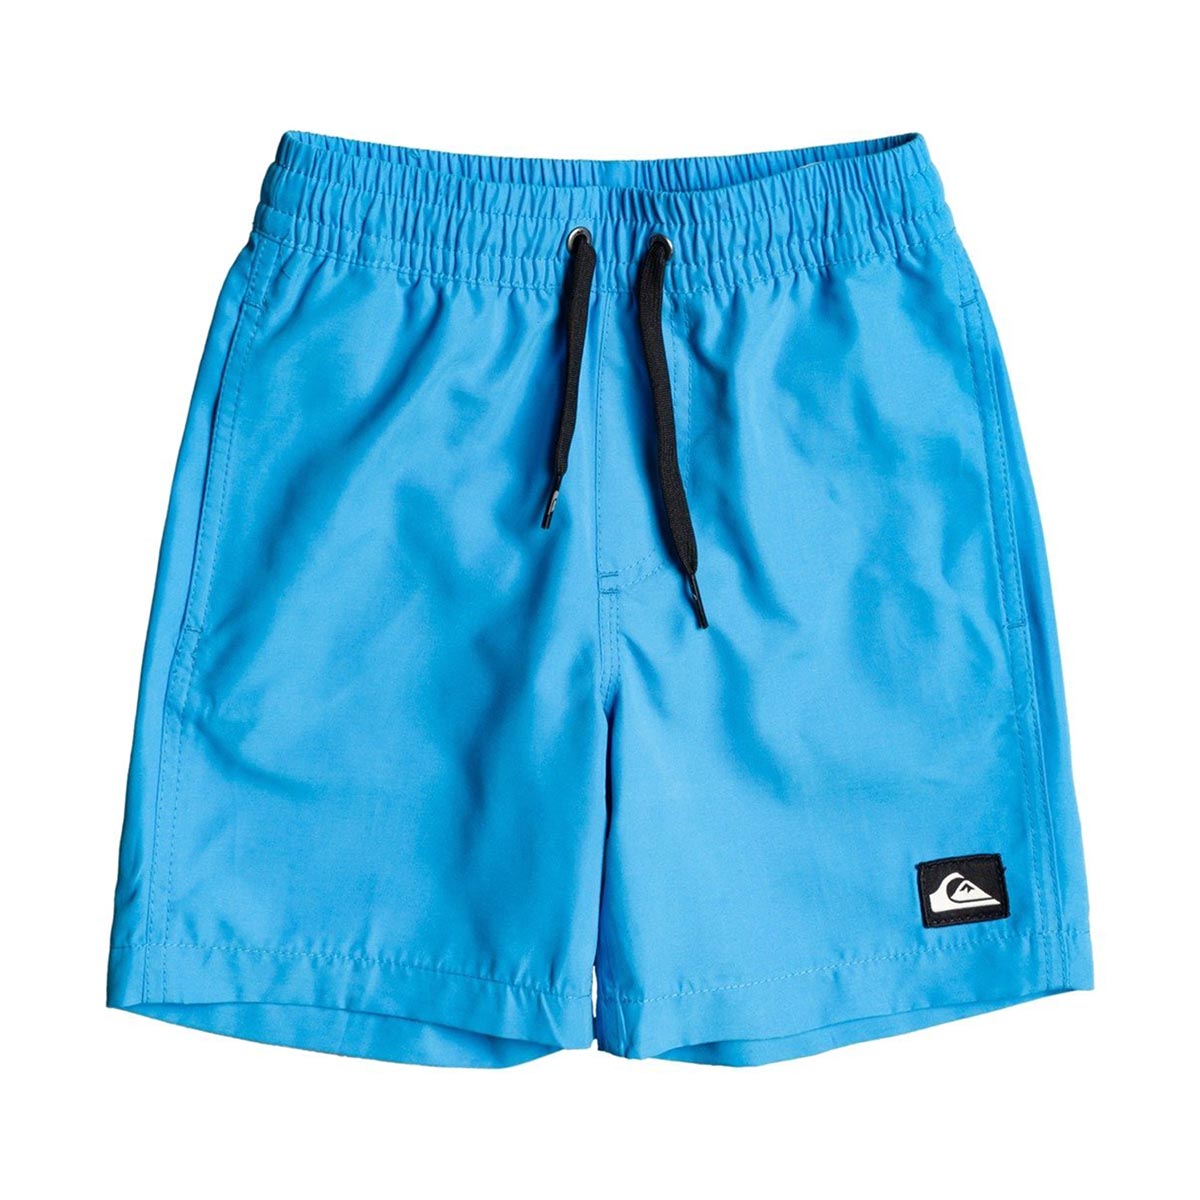 QUIKSILVER - EVERYDAY VOLLEY SWIM SHORTS 13'' (2-7 YEARS)